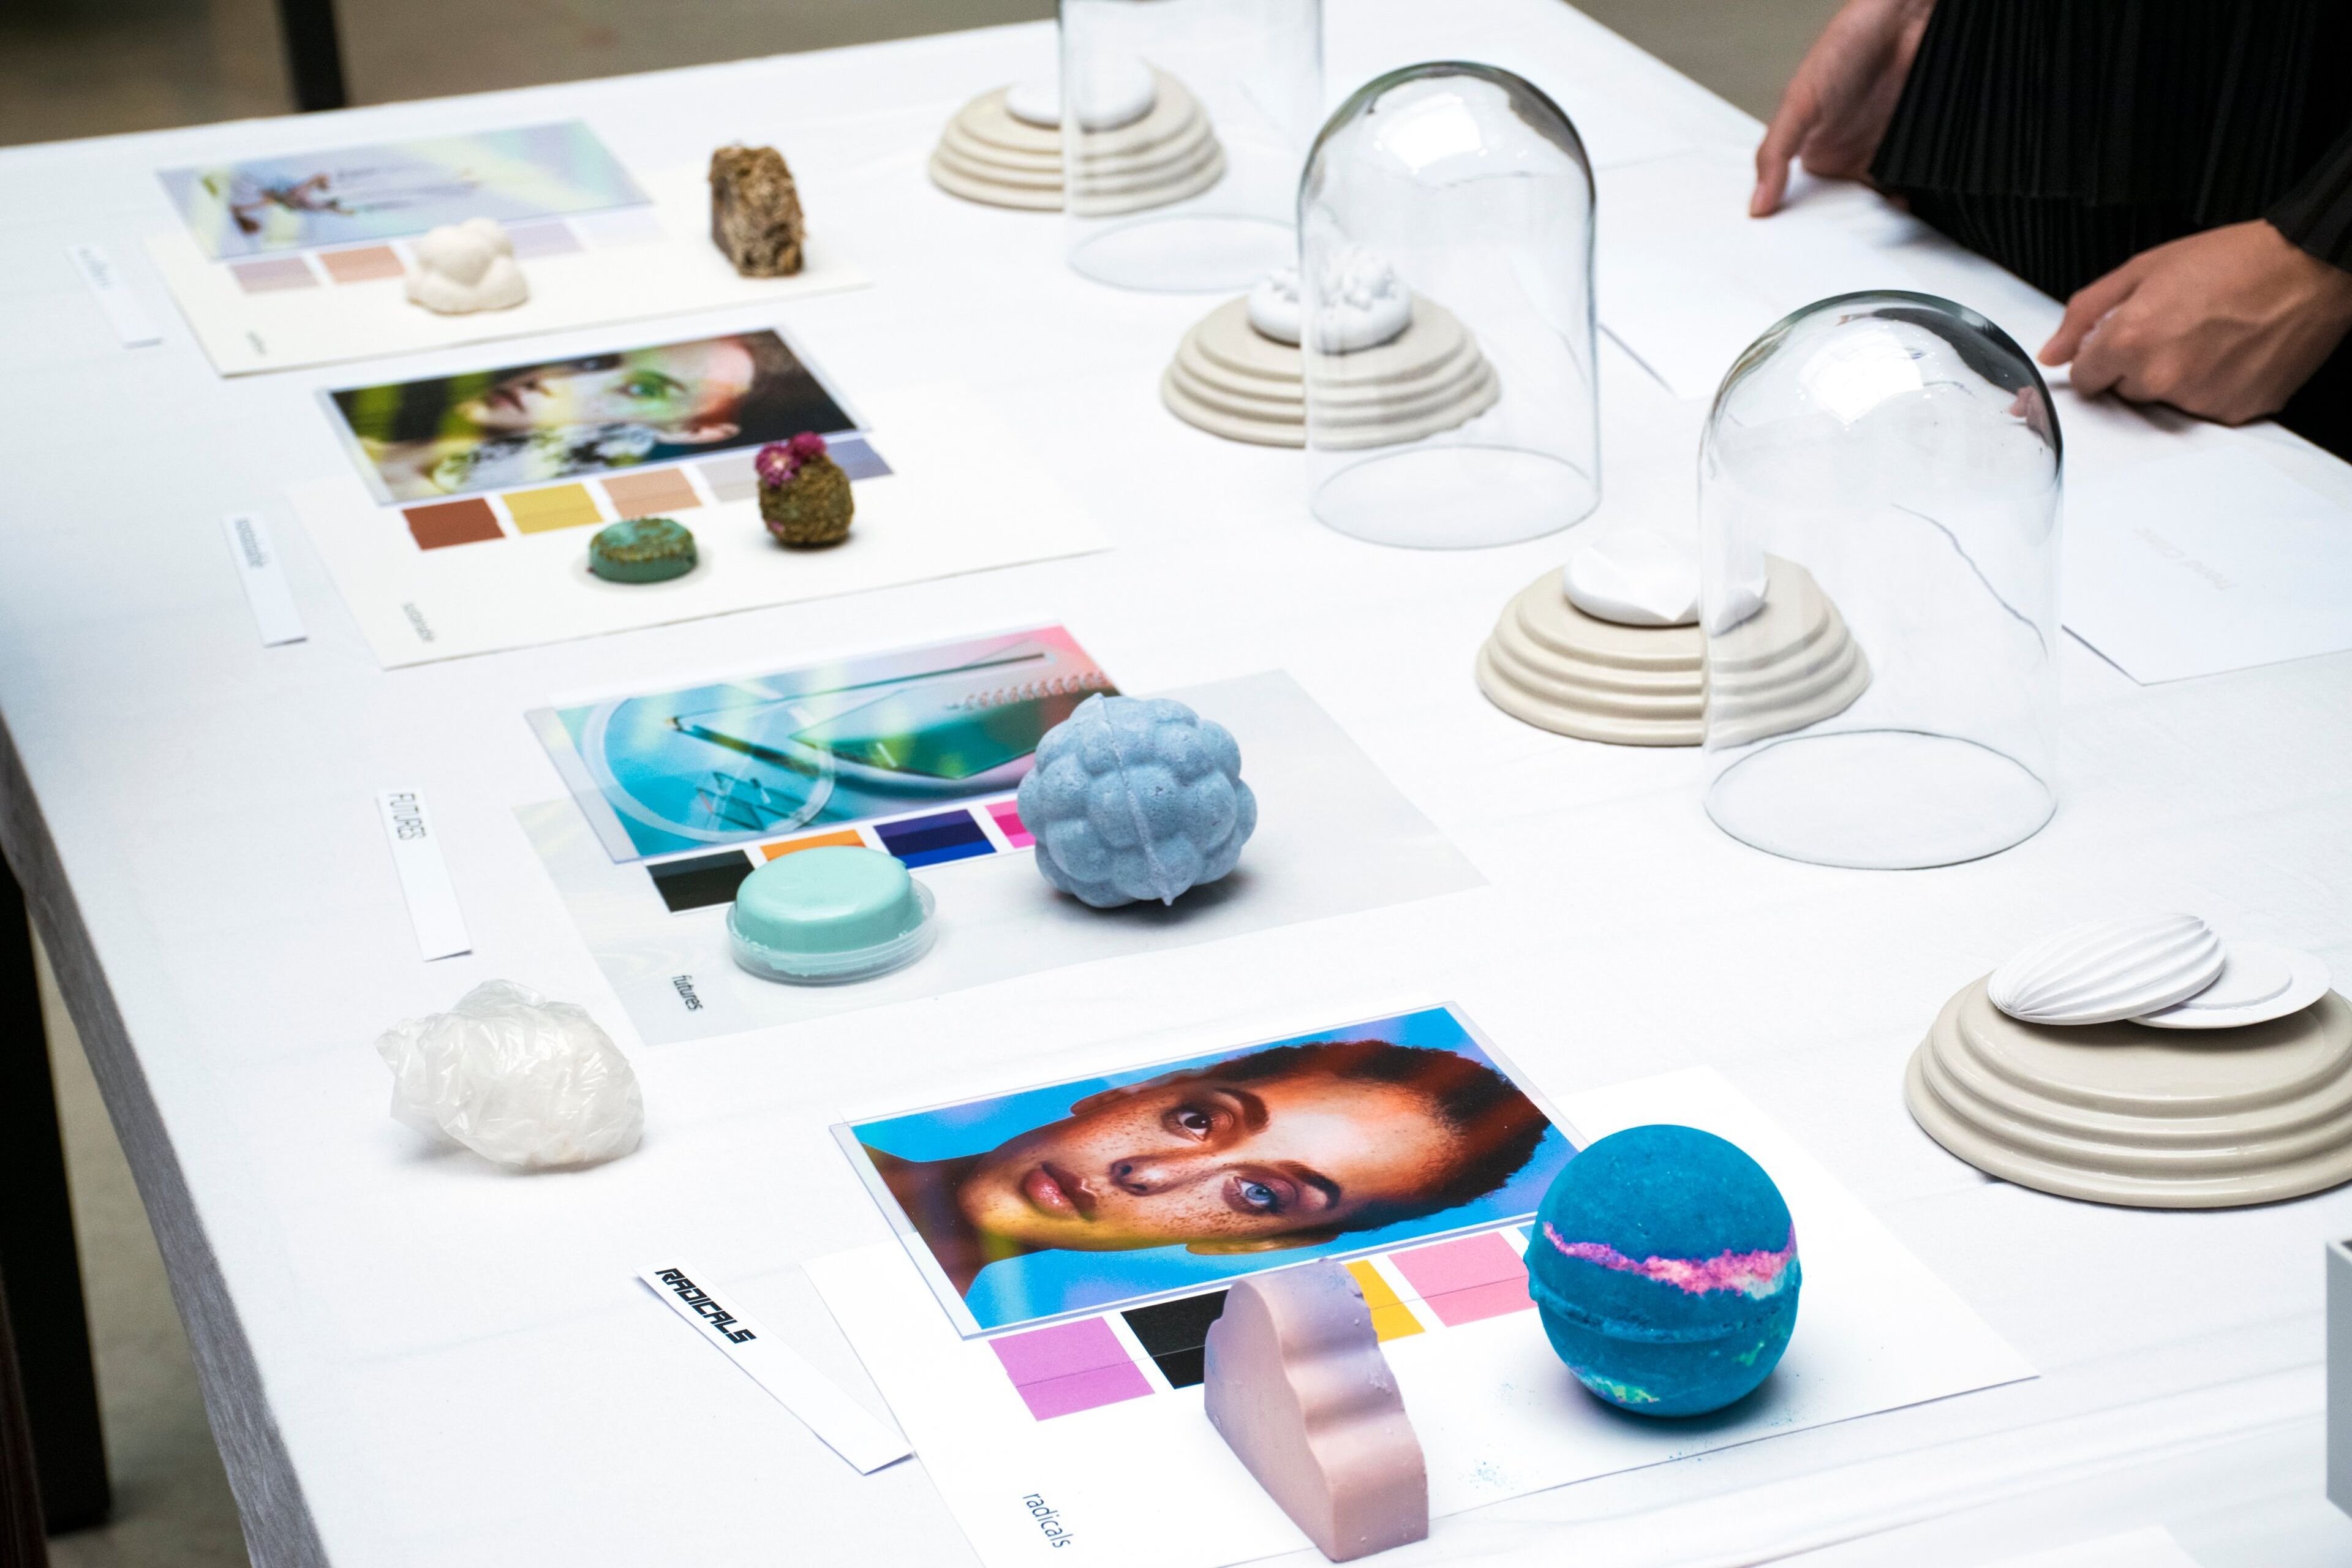 A table showcasing various design elements, including photographs, color swatches, and 3D printed models under glass domes.